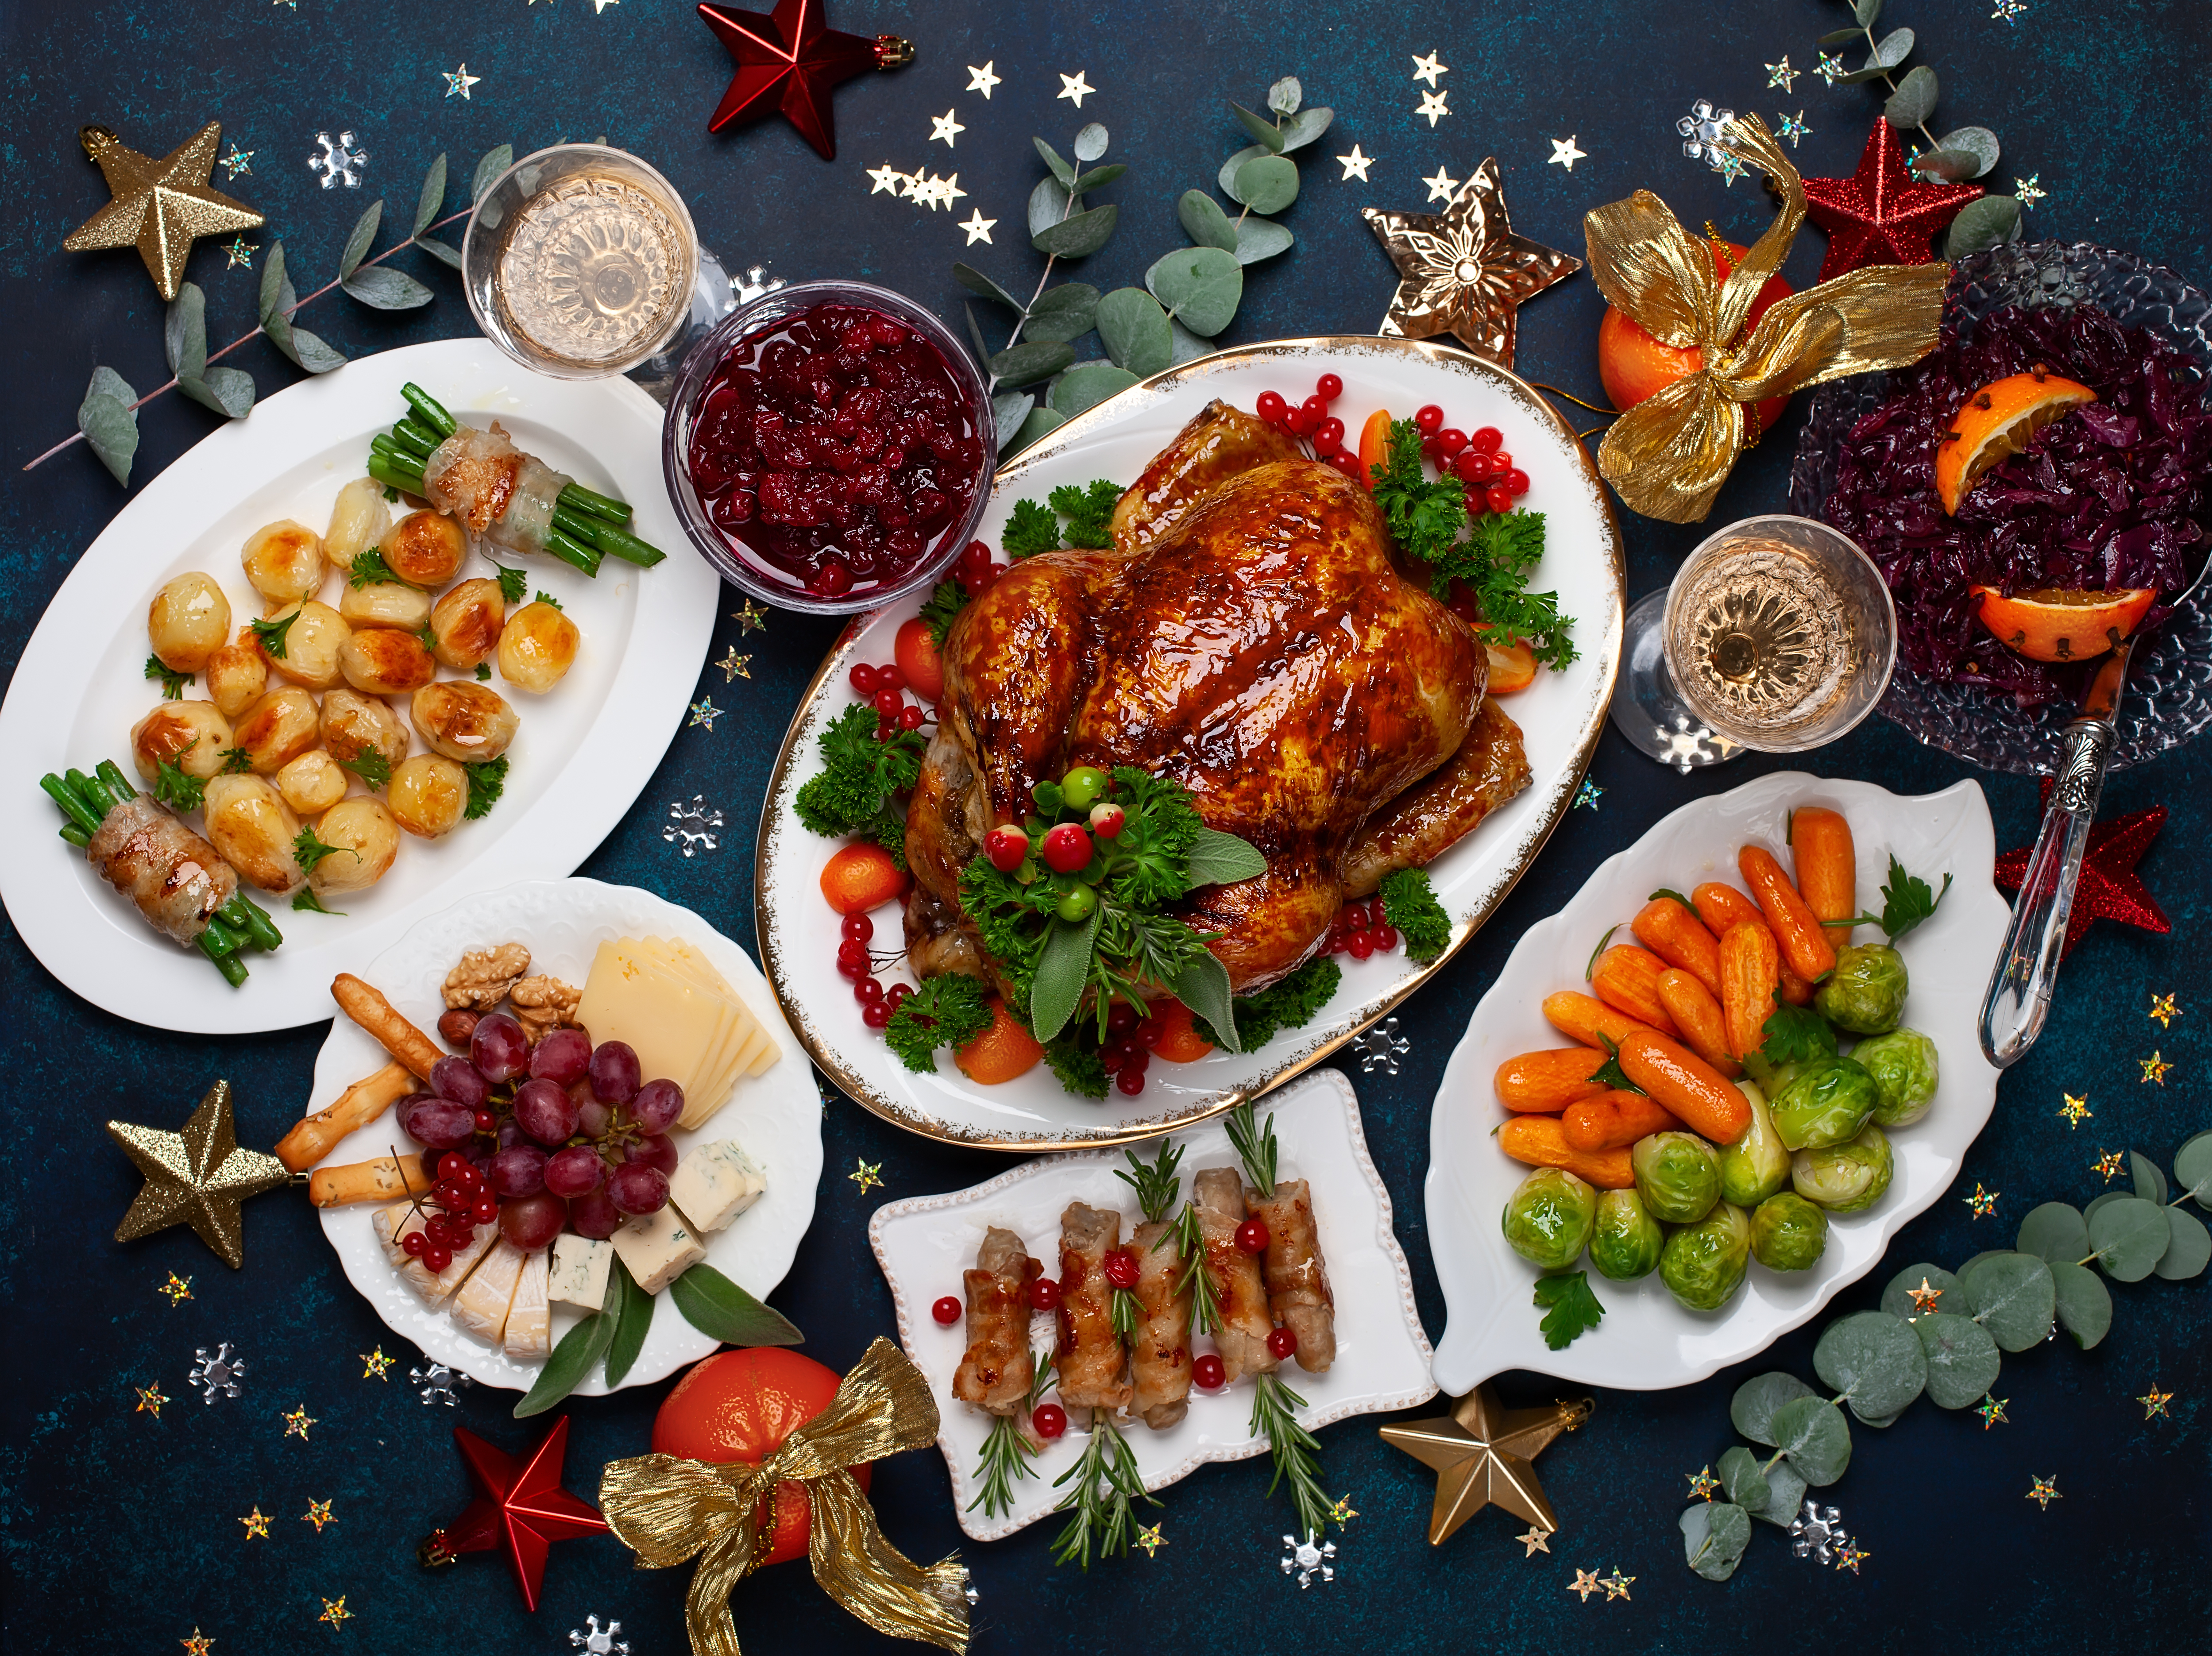 A Christmas dinner laid out on a decorated table | Source: Shutterstock